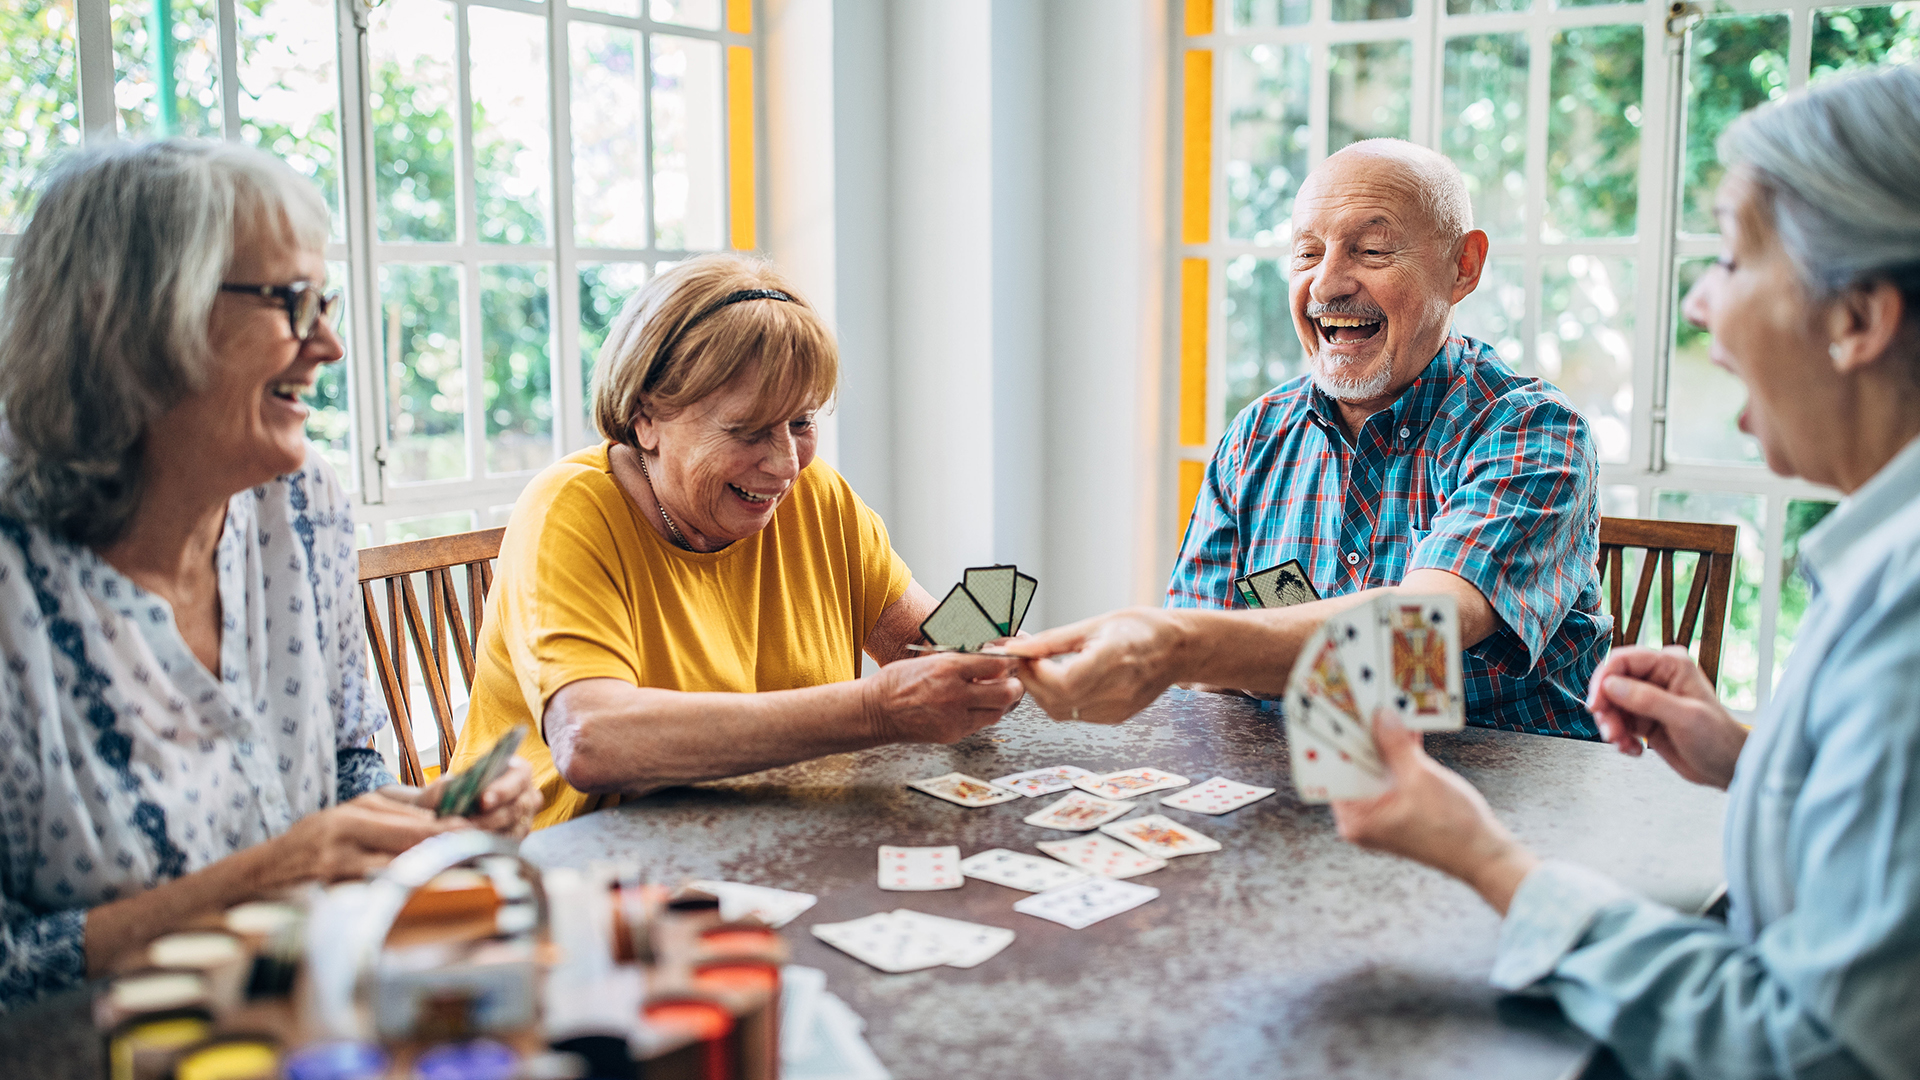 Group of senior friends playing cards and laughing together